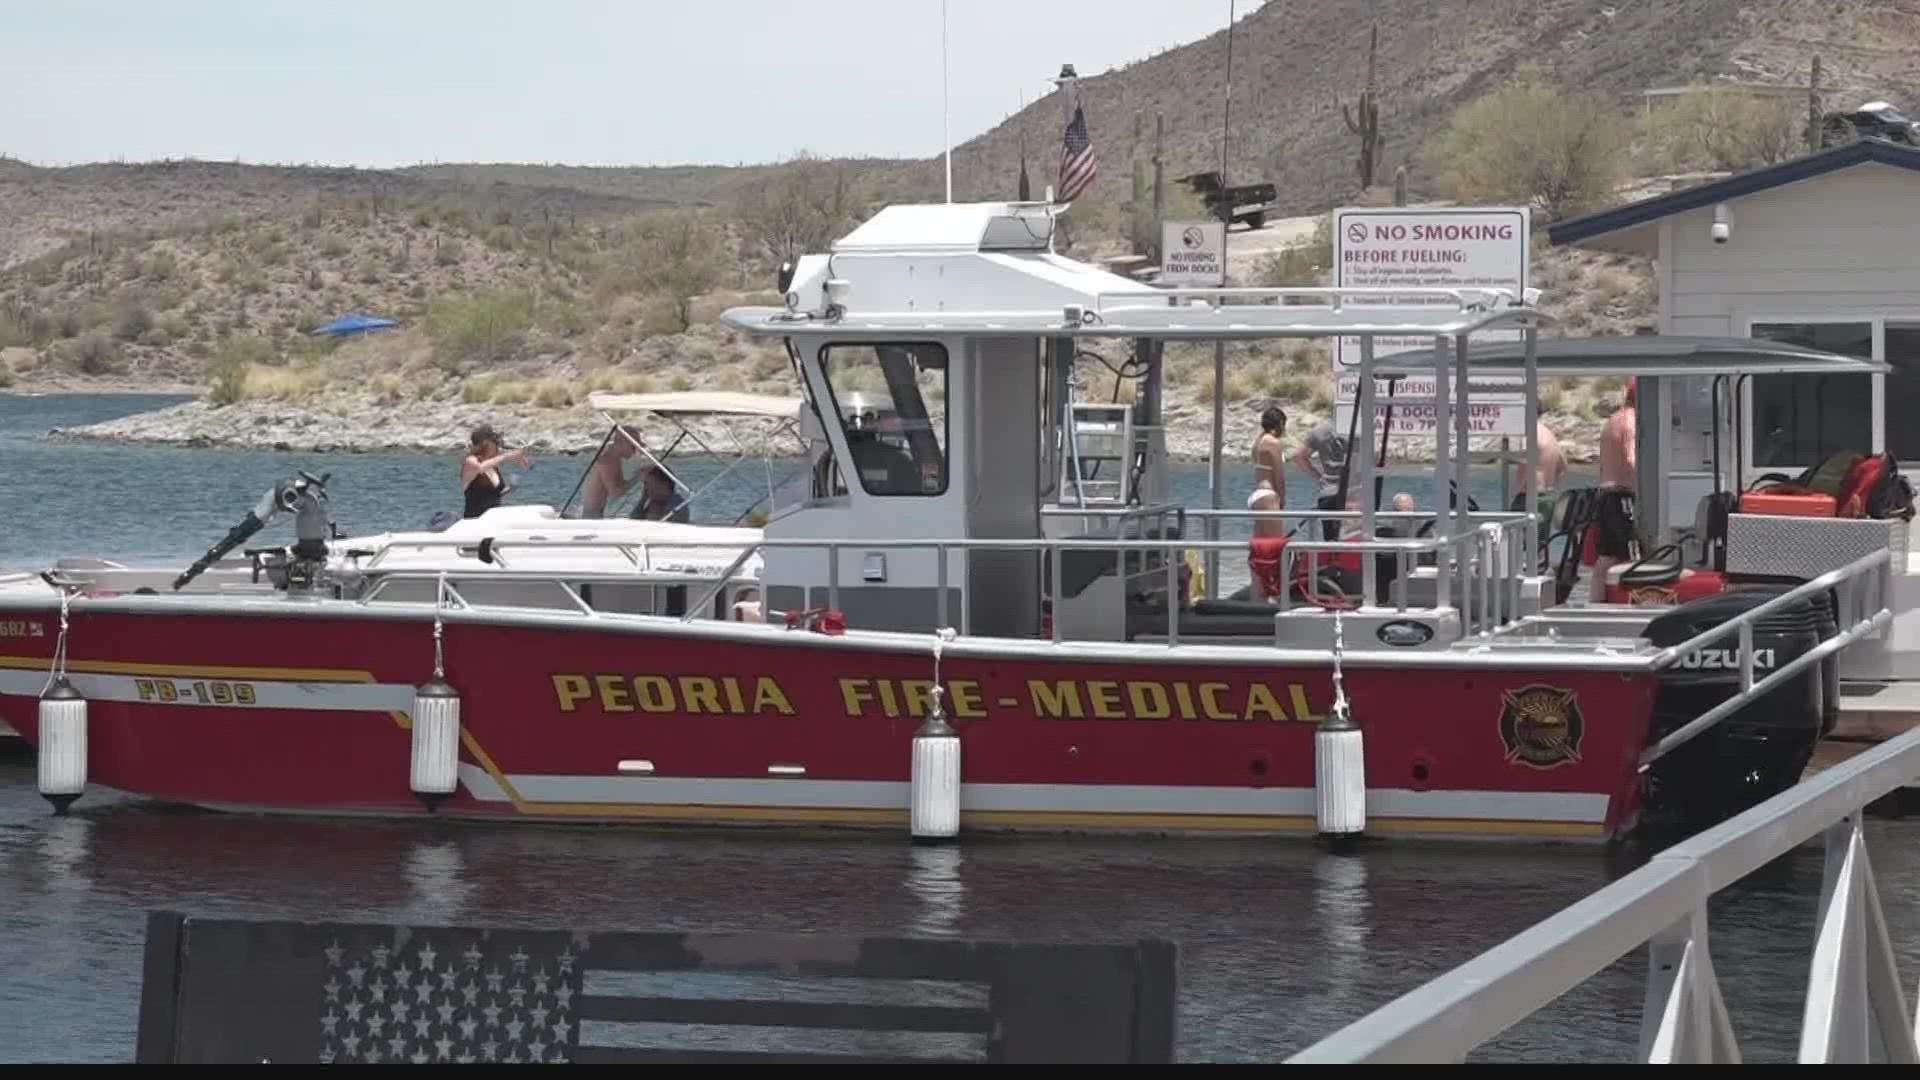 Authorities say the woman had to be flown to the hospital for injuries sustained from a boating incident.